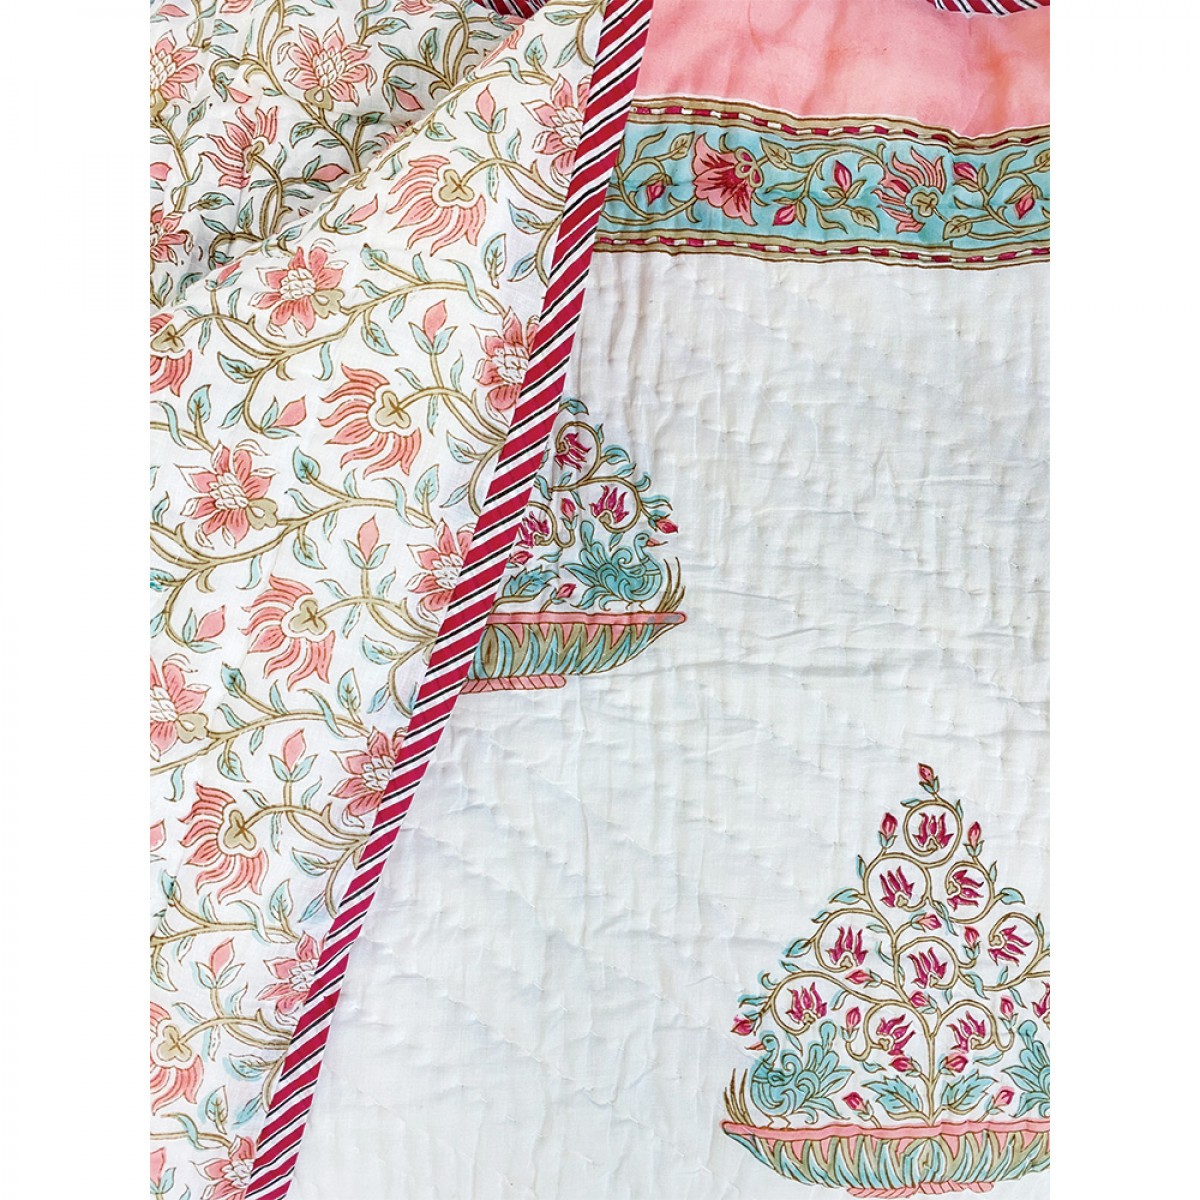 100% Cotton Hand Block Printed Queen Size Quilts - Coral Blossom